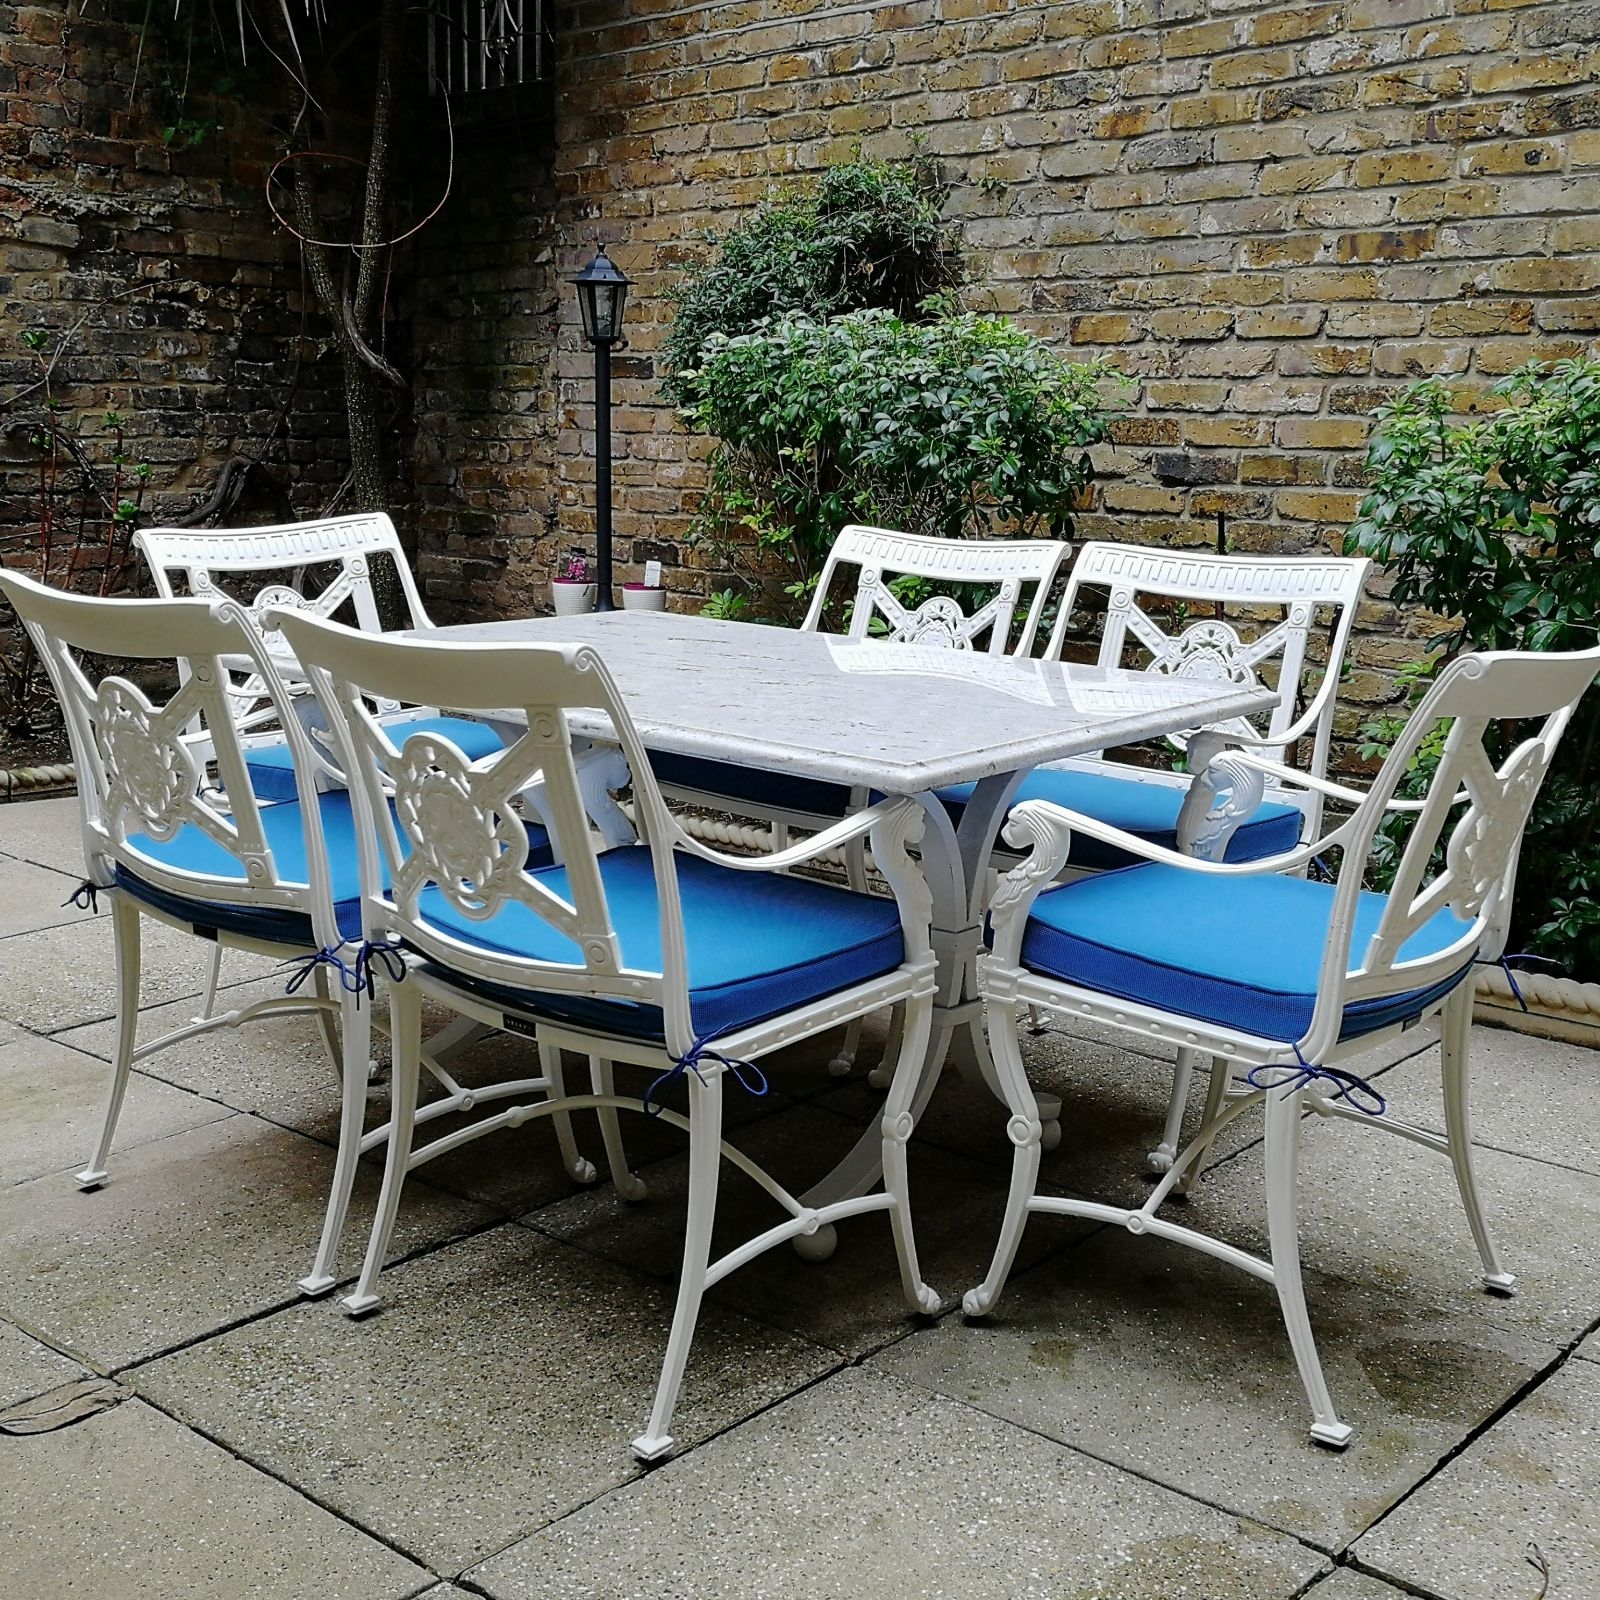 Marble garden dining table with 6 chairs